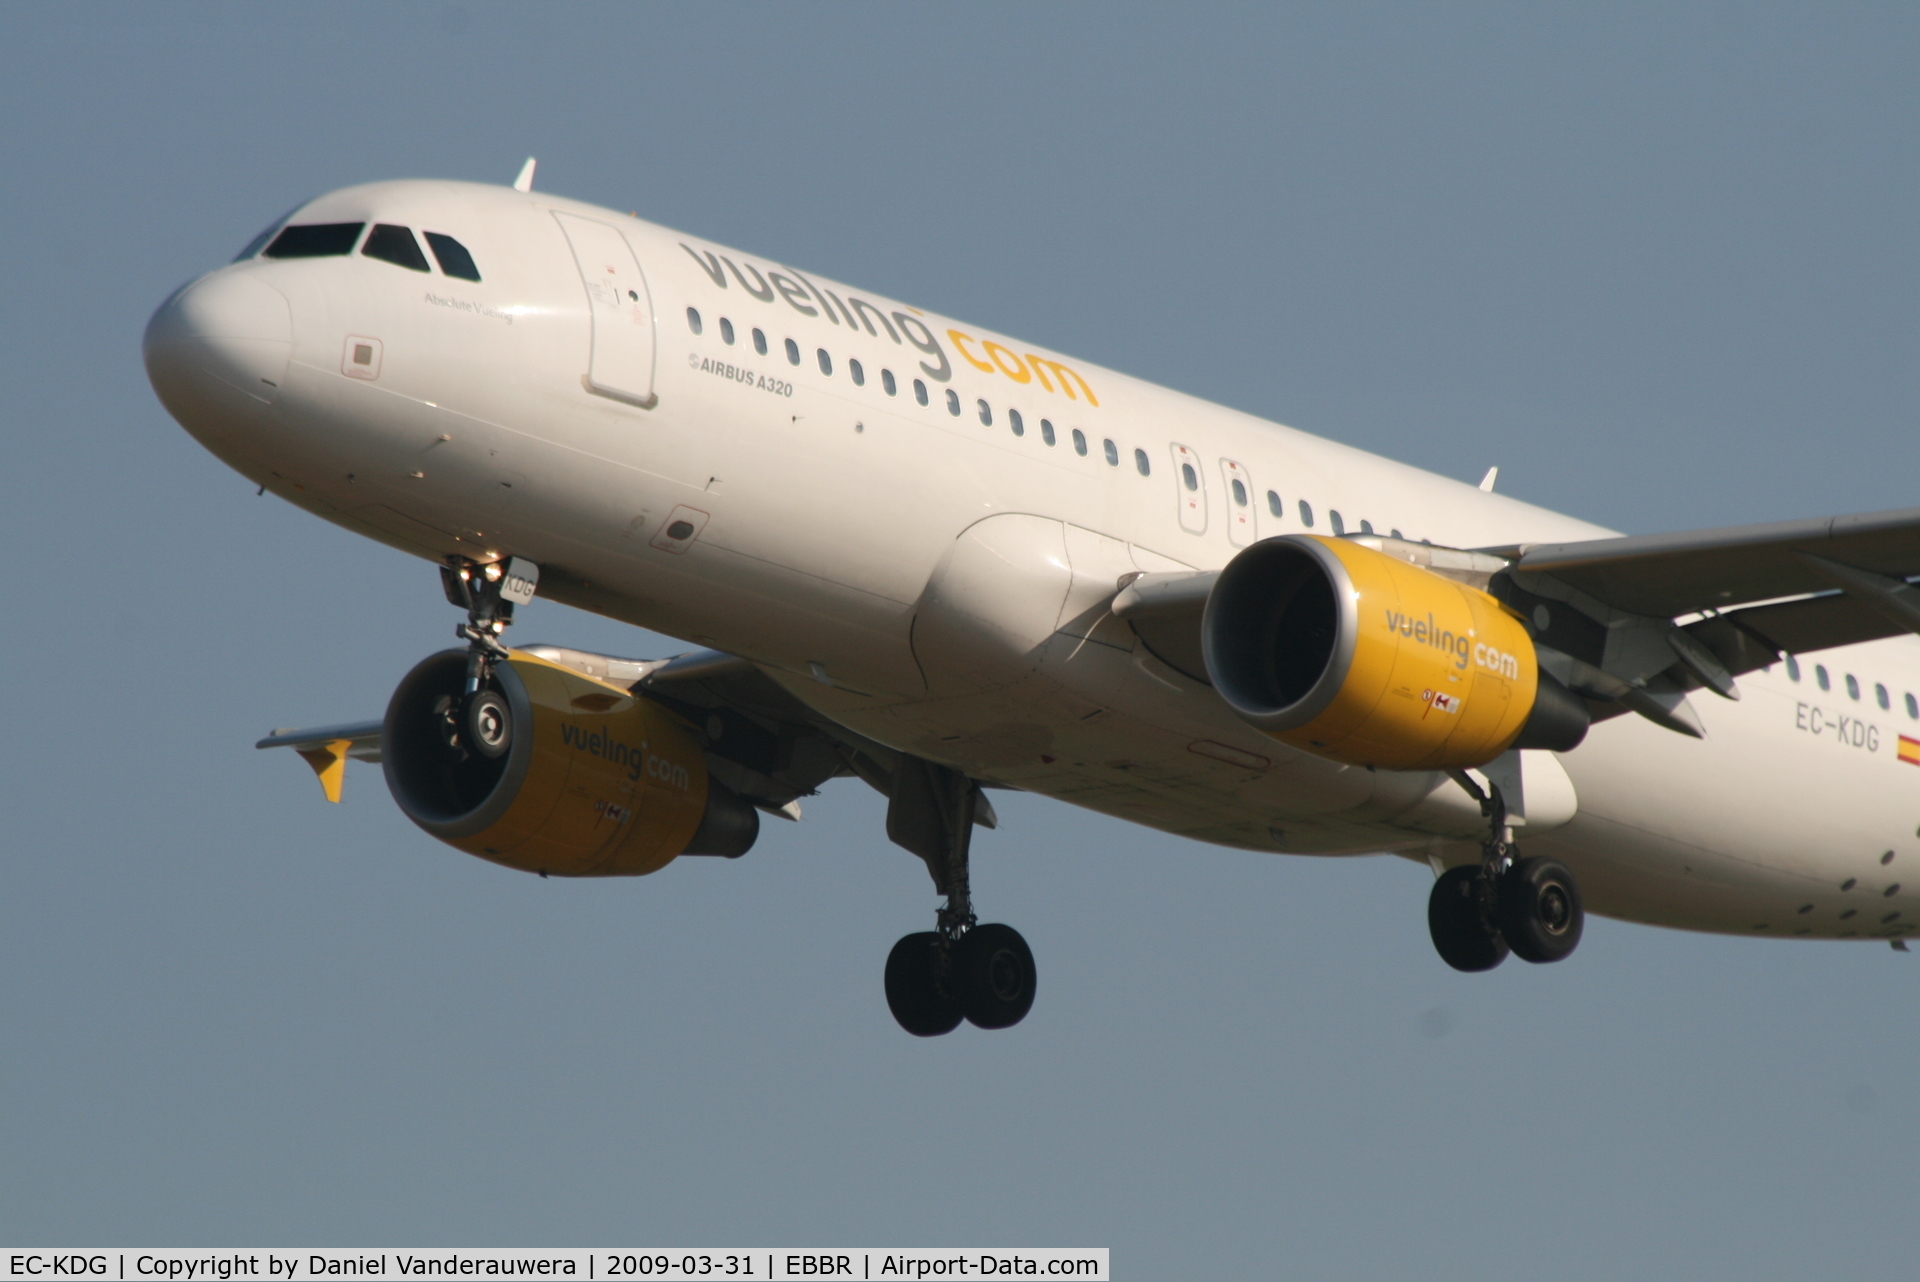 EC-KDG, 2007 Airbus A320-214 C/N 3095, Arrival of flight VY7060 to RWY 25L